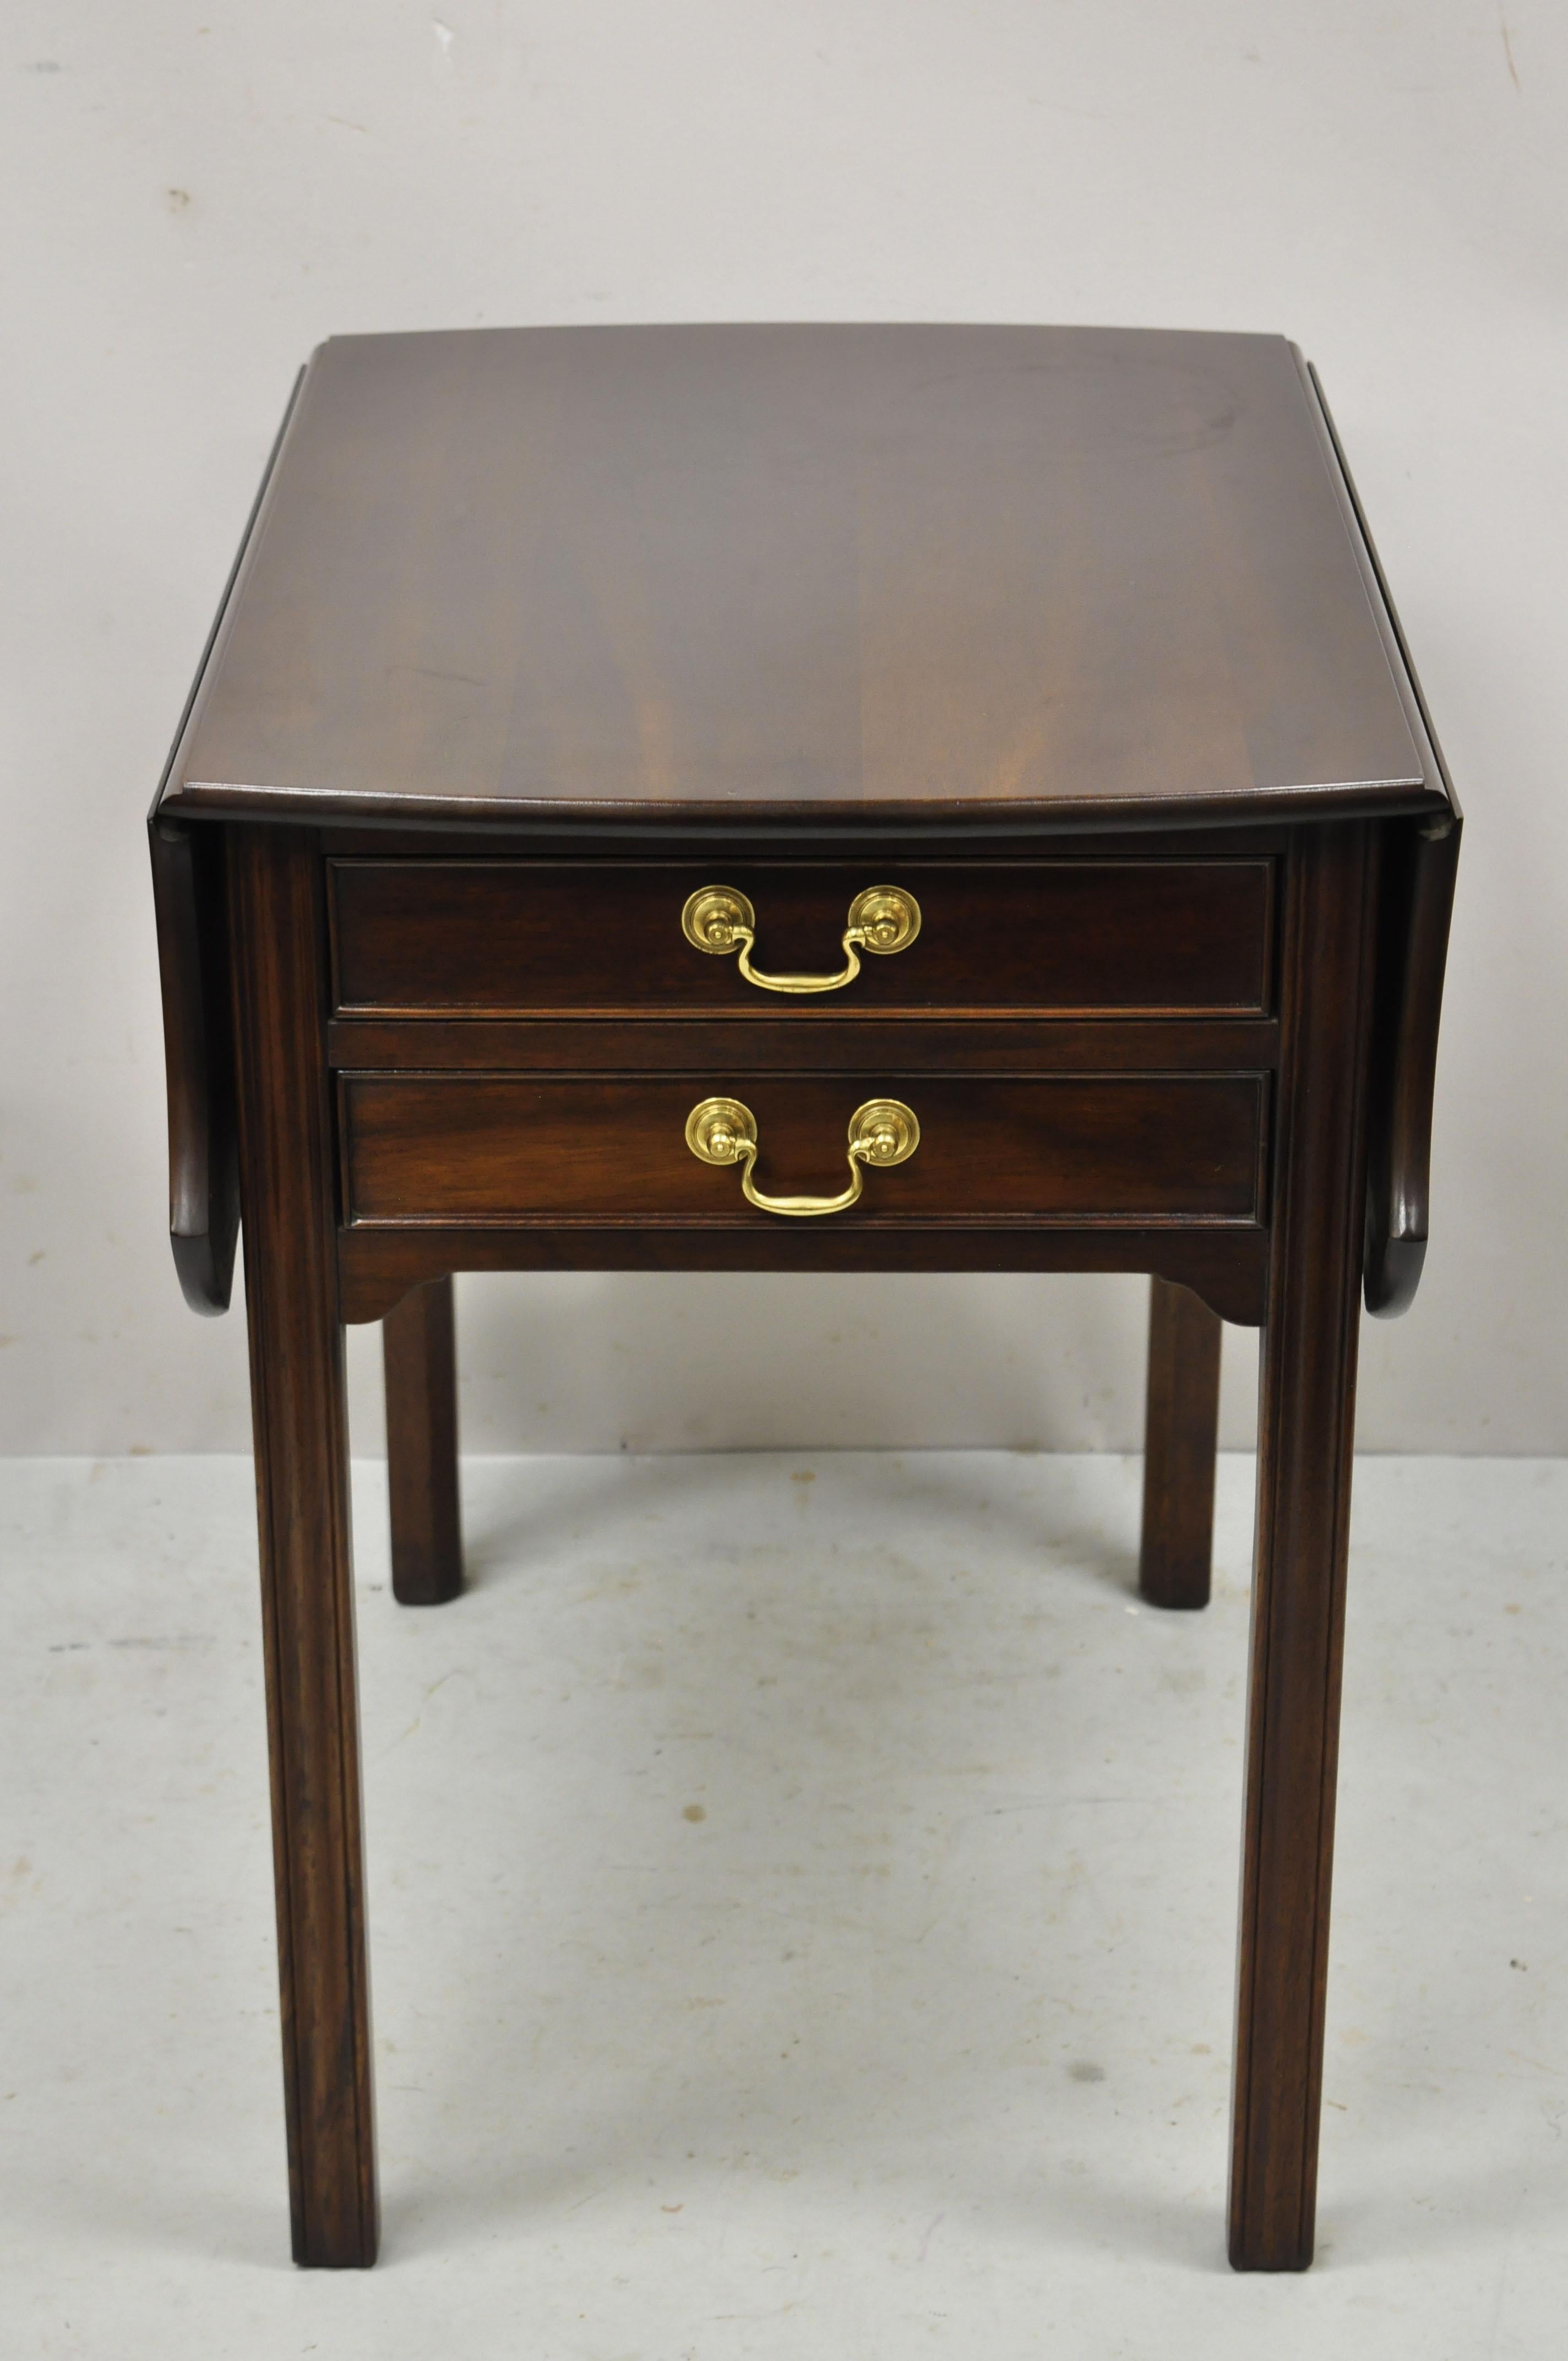 L & J G Stickley Georgian solid mahogany drop leaf pembroke lamp side table. Item features solid wood construction, beautiful wood grain, finished back, original label, 2 dovetailed drawers, quality American craftsmanship, great style and form.